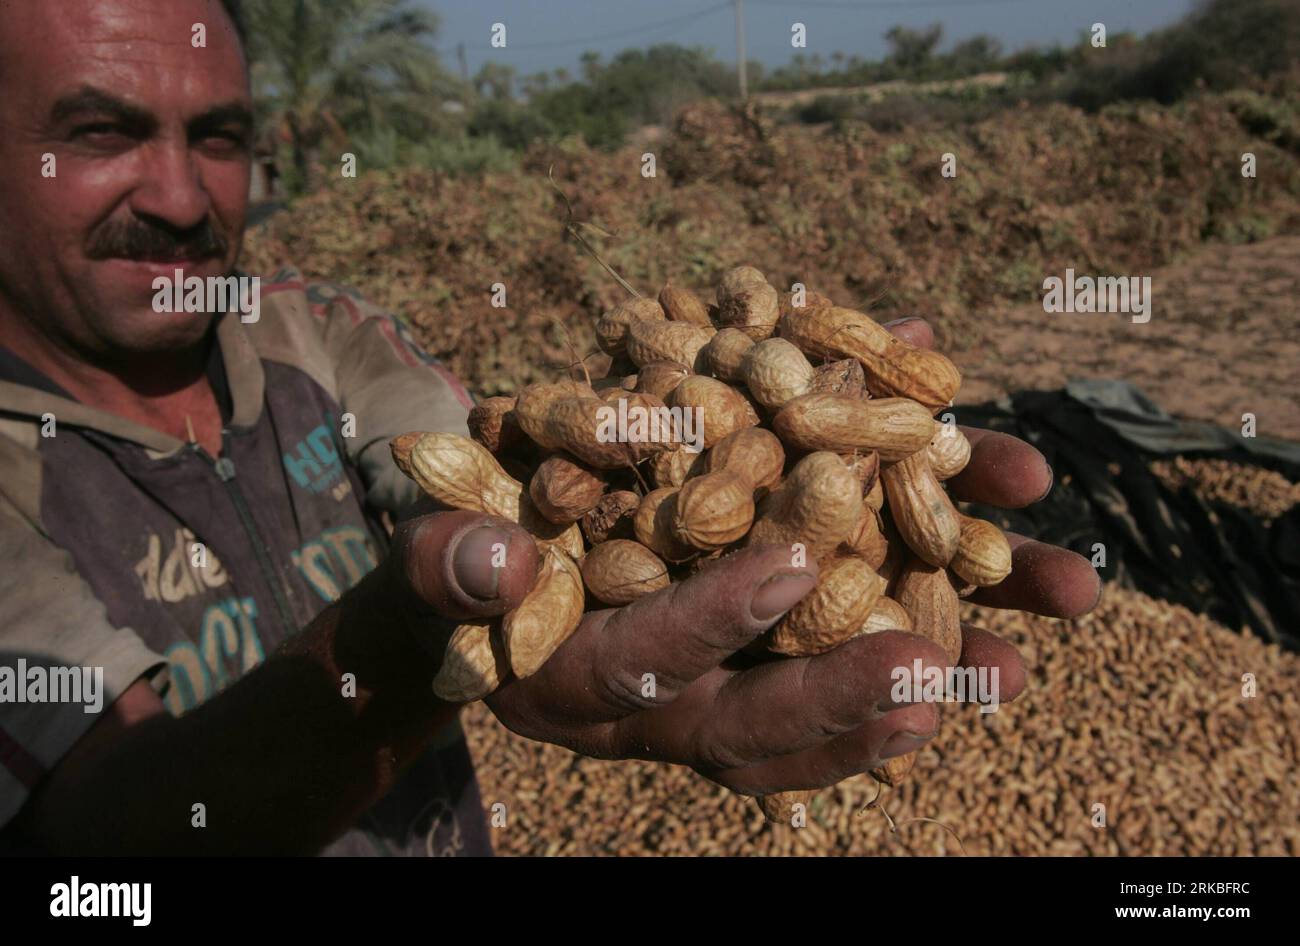 Bildnummer: 54553308  Datum: 21.10.2010  Copyright: imago/Xinhua (101021) -- GAZA, Oct. 21, 2010 (Xinhua) -- A Palestinian farmer harvests peanuts in a field, in which peanuts were cultivated in experiment for the first time, in the southern Gaza Strip town of Rafah, on Oct. 21, 2010. (Xinhua/Khaled Omar) (wh) MIDEAST-GAZA-AGRICULTURE PUBLICATIONxNOTxINxCHN Wirtschaft Landwirtschaft kbdig xcb 2010 quer  o0   Palästina Ernte Erdnüsse Landwirtschaft    Bildnummer 54553308 Date 21 10 2010 Copyright Imago XINHUA  Gaza OCT 21 2010 XINHUA a PALESTINIAN Farmer Harvests Peanuts in a Field in Which Pea Stock Photo